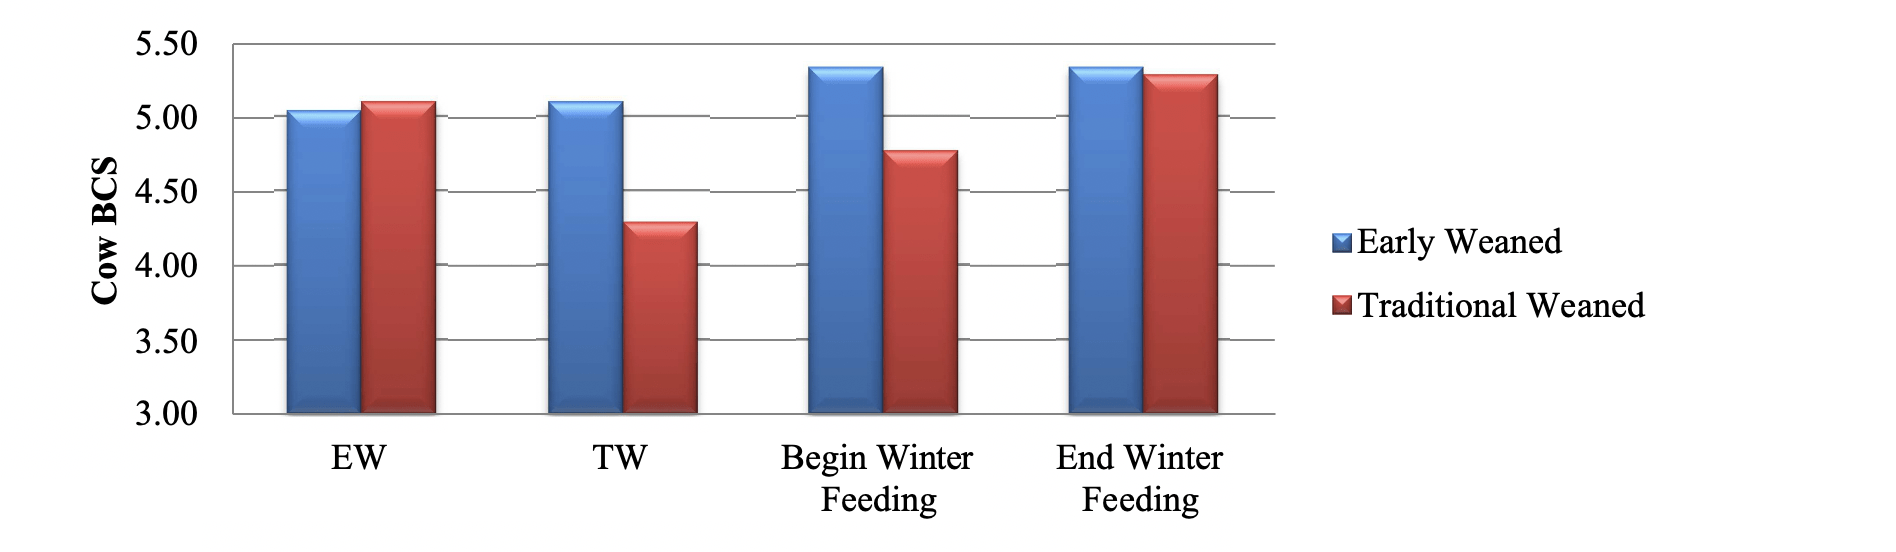 Graph showing effects of weaning strategy on a cow's BCS during different phases. Cows assigned for early weaning showed a smaller drop in BCS at early weaning and the beginning for winter feeding than cows assigned for traditional weaning.